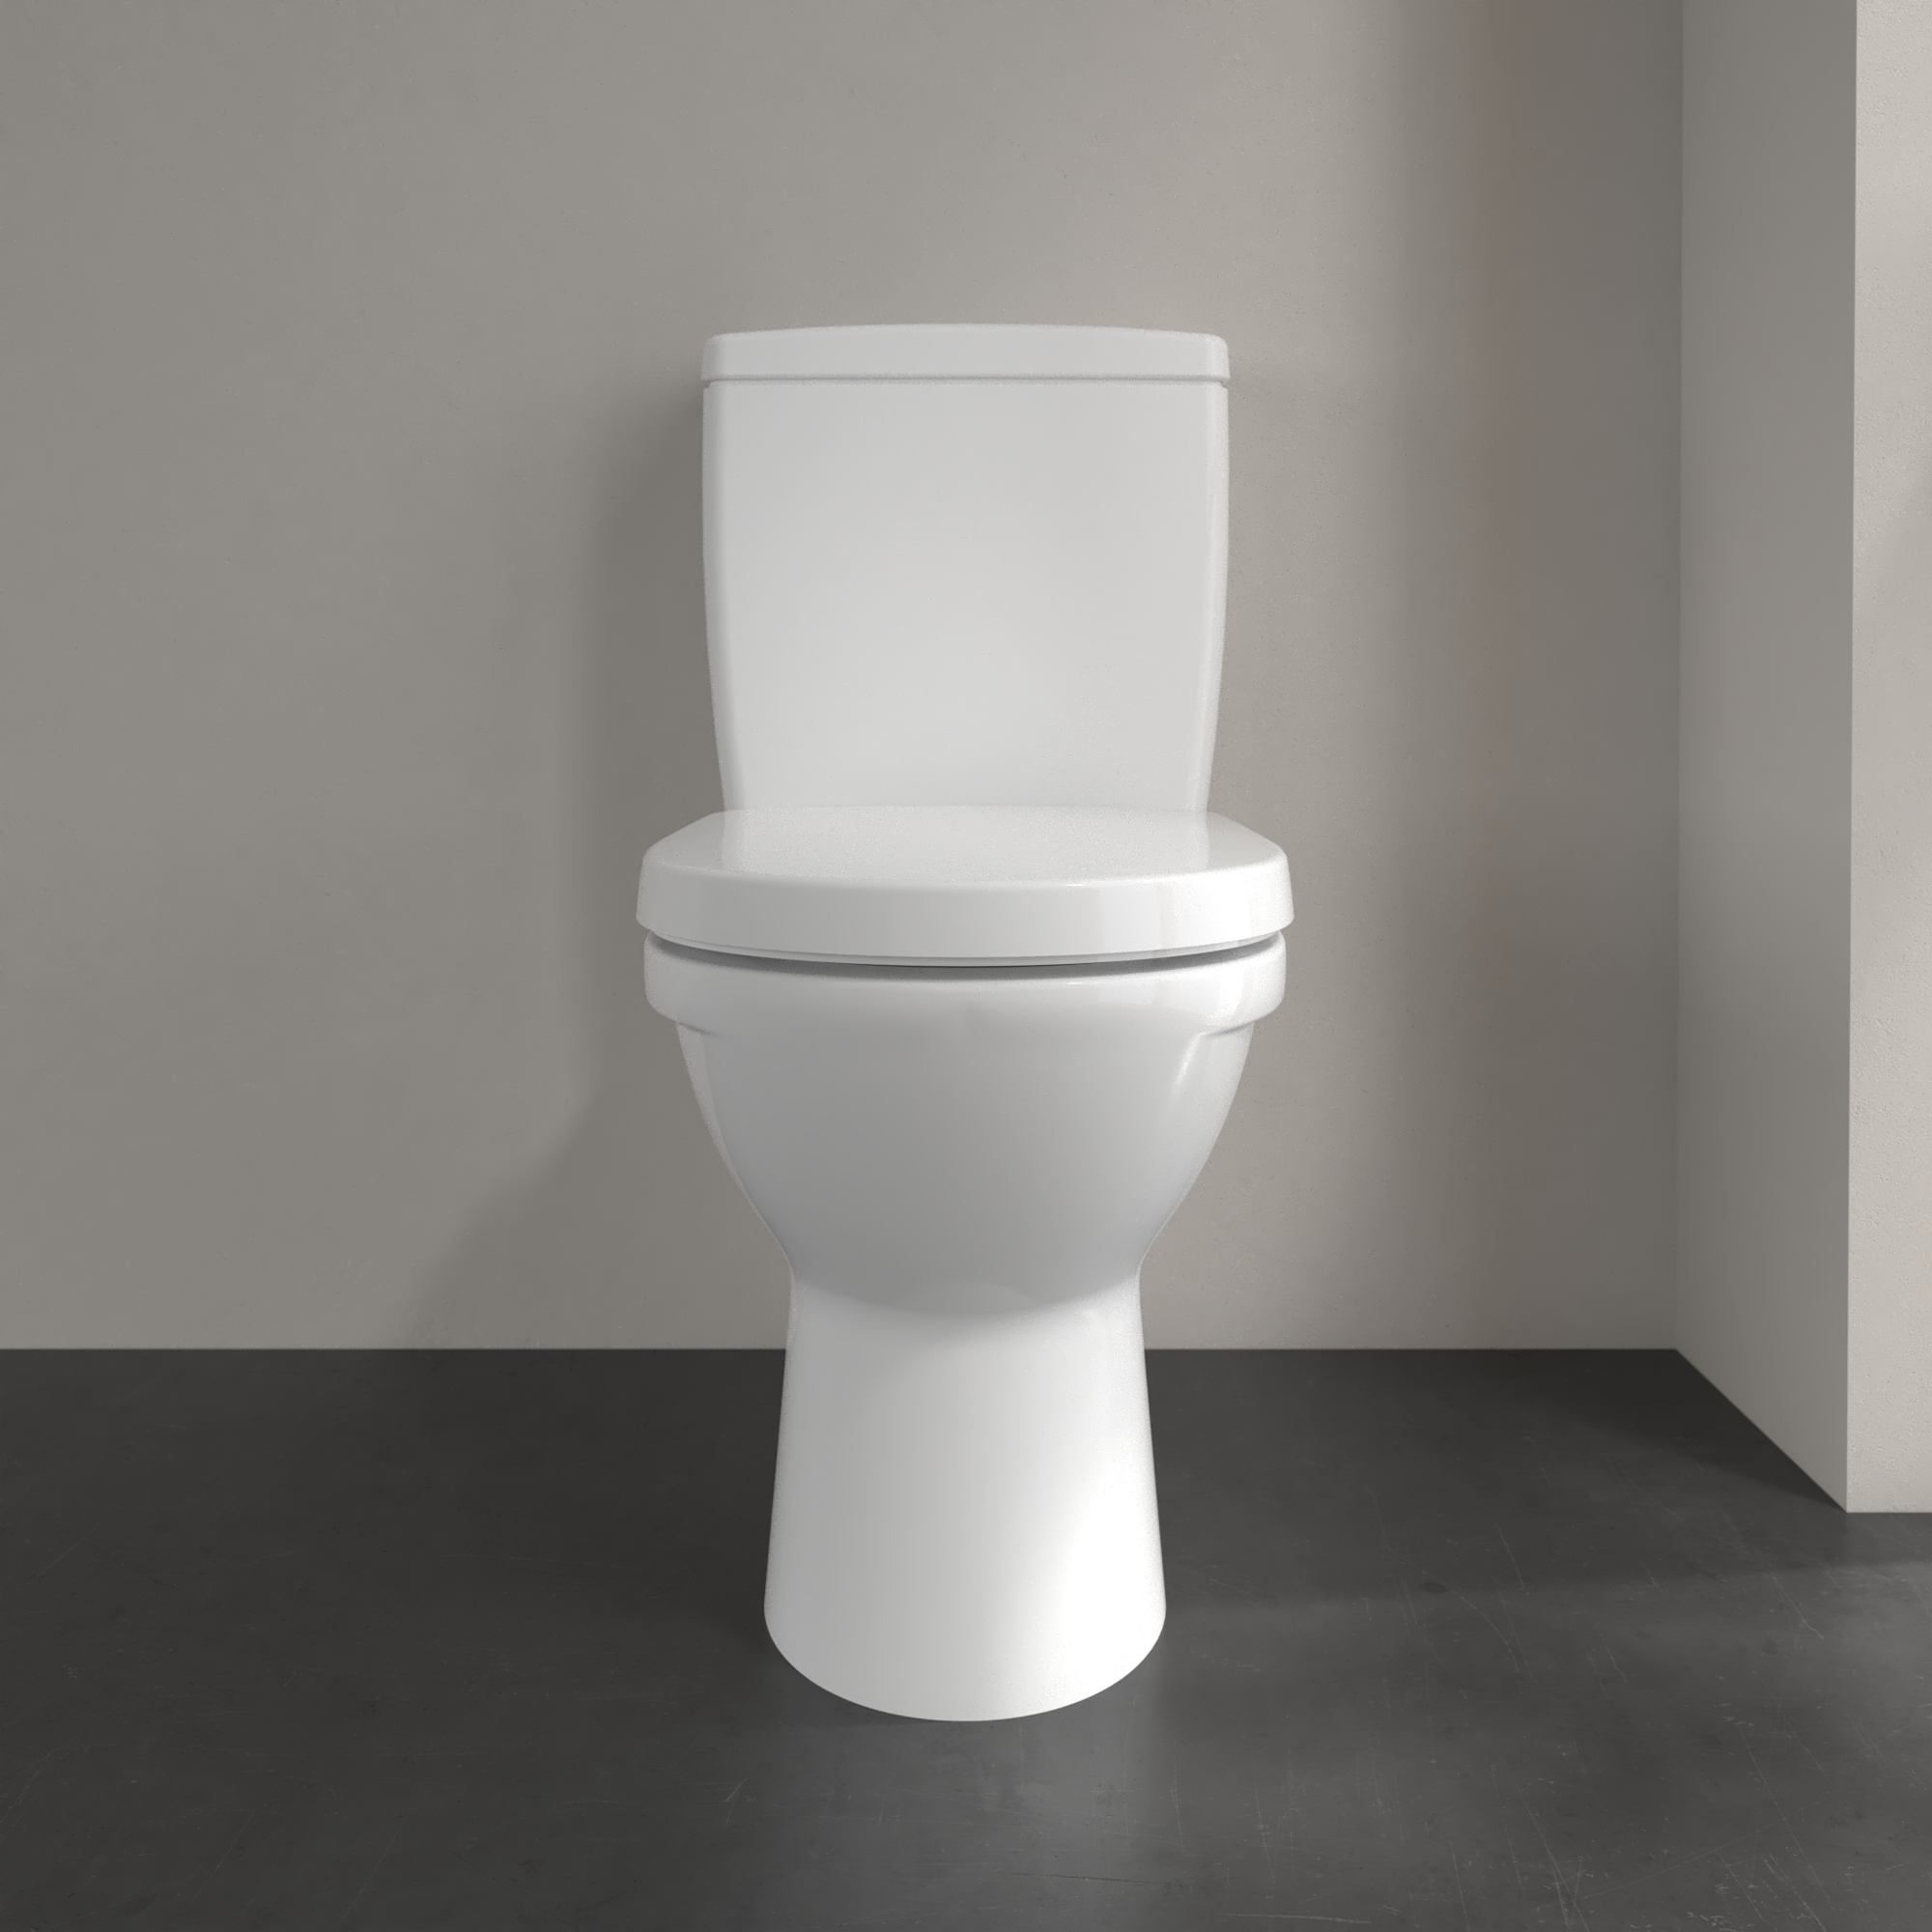 Stand-WC 'O.Novo' mit Spülrand weiß + product picture